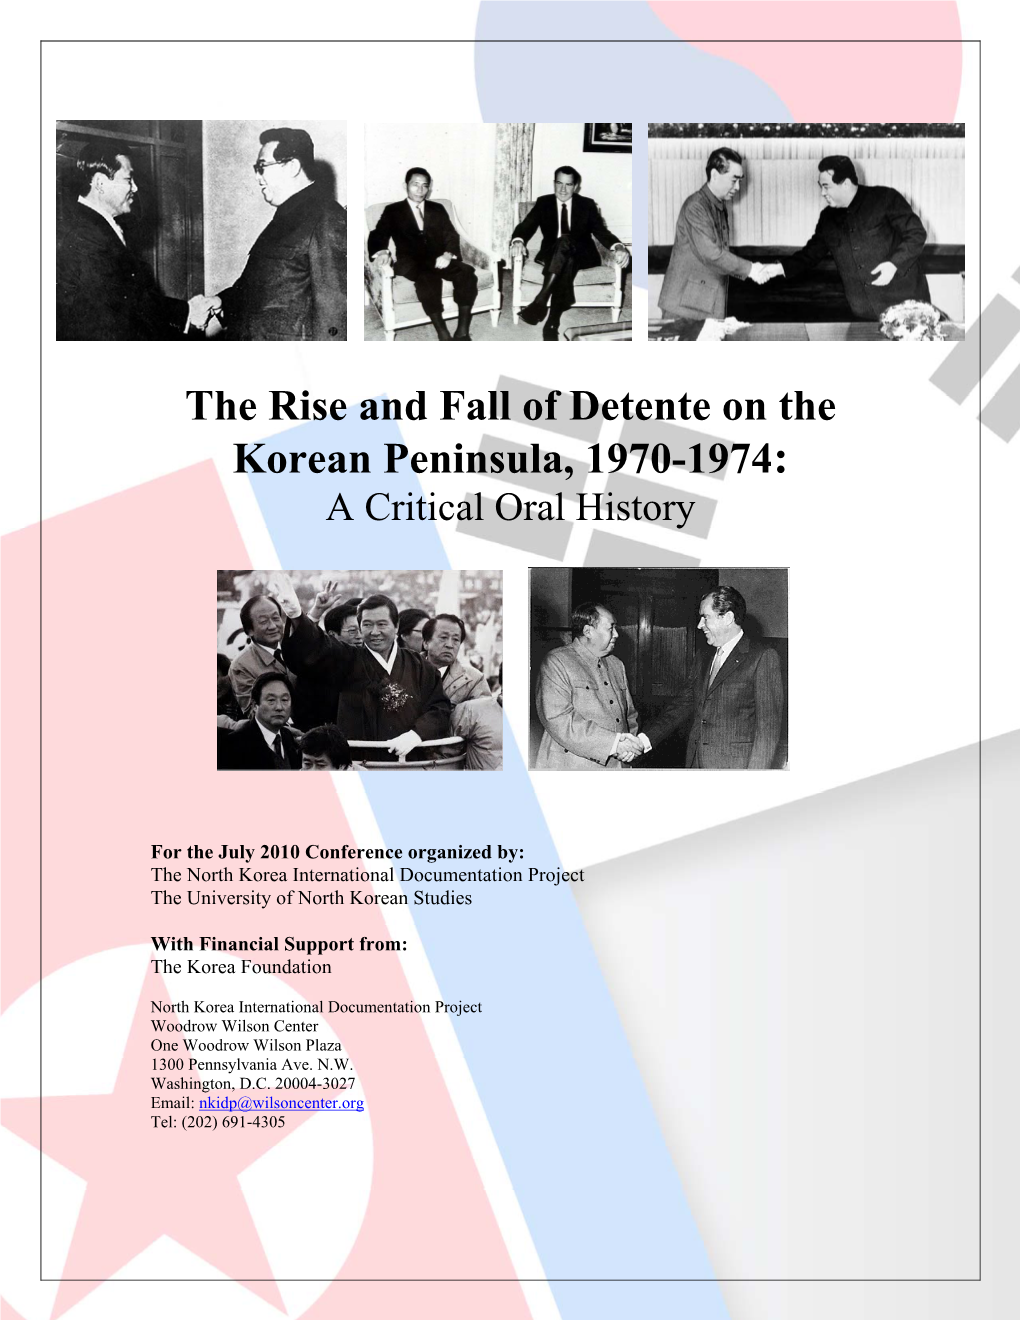 The Rise and Fall of Detente on the Korean Peninsula, 1970-1974